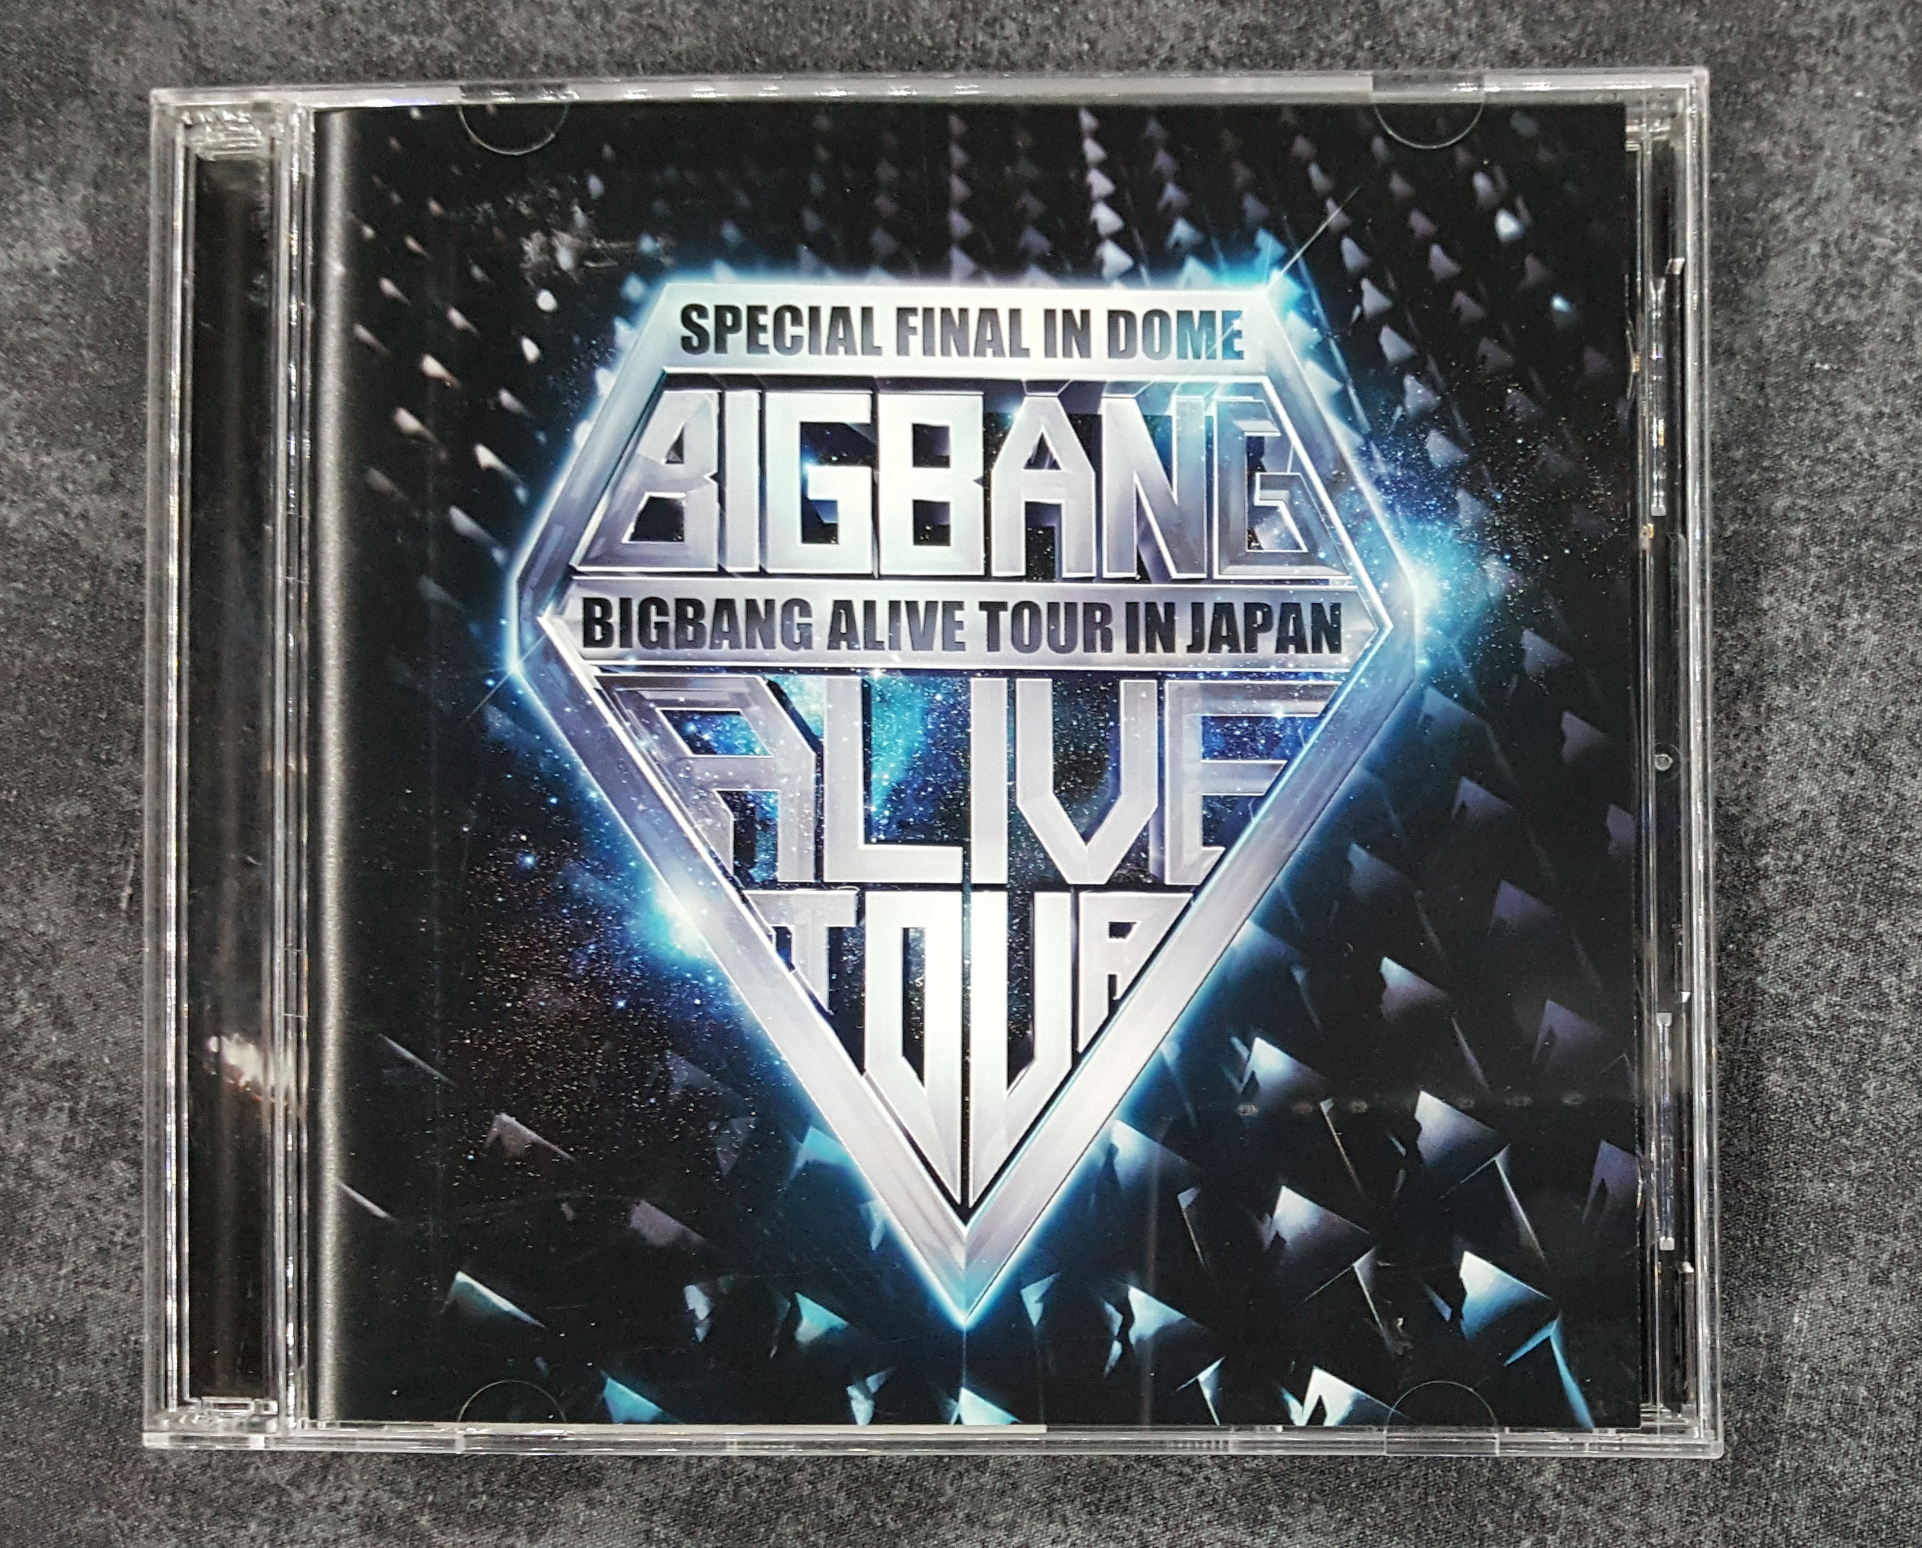 2012 - Alive Tour Japan - Special Final in Dome CD - Rental